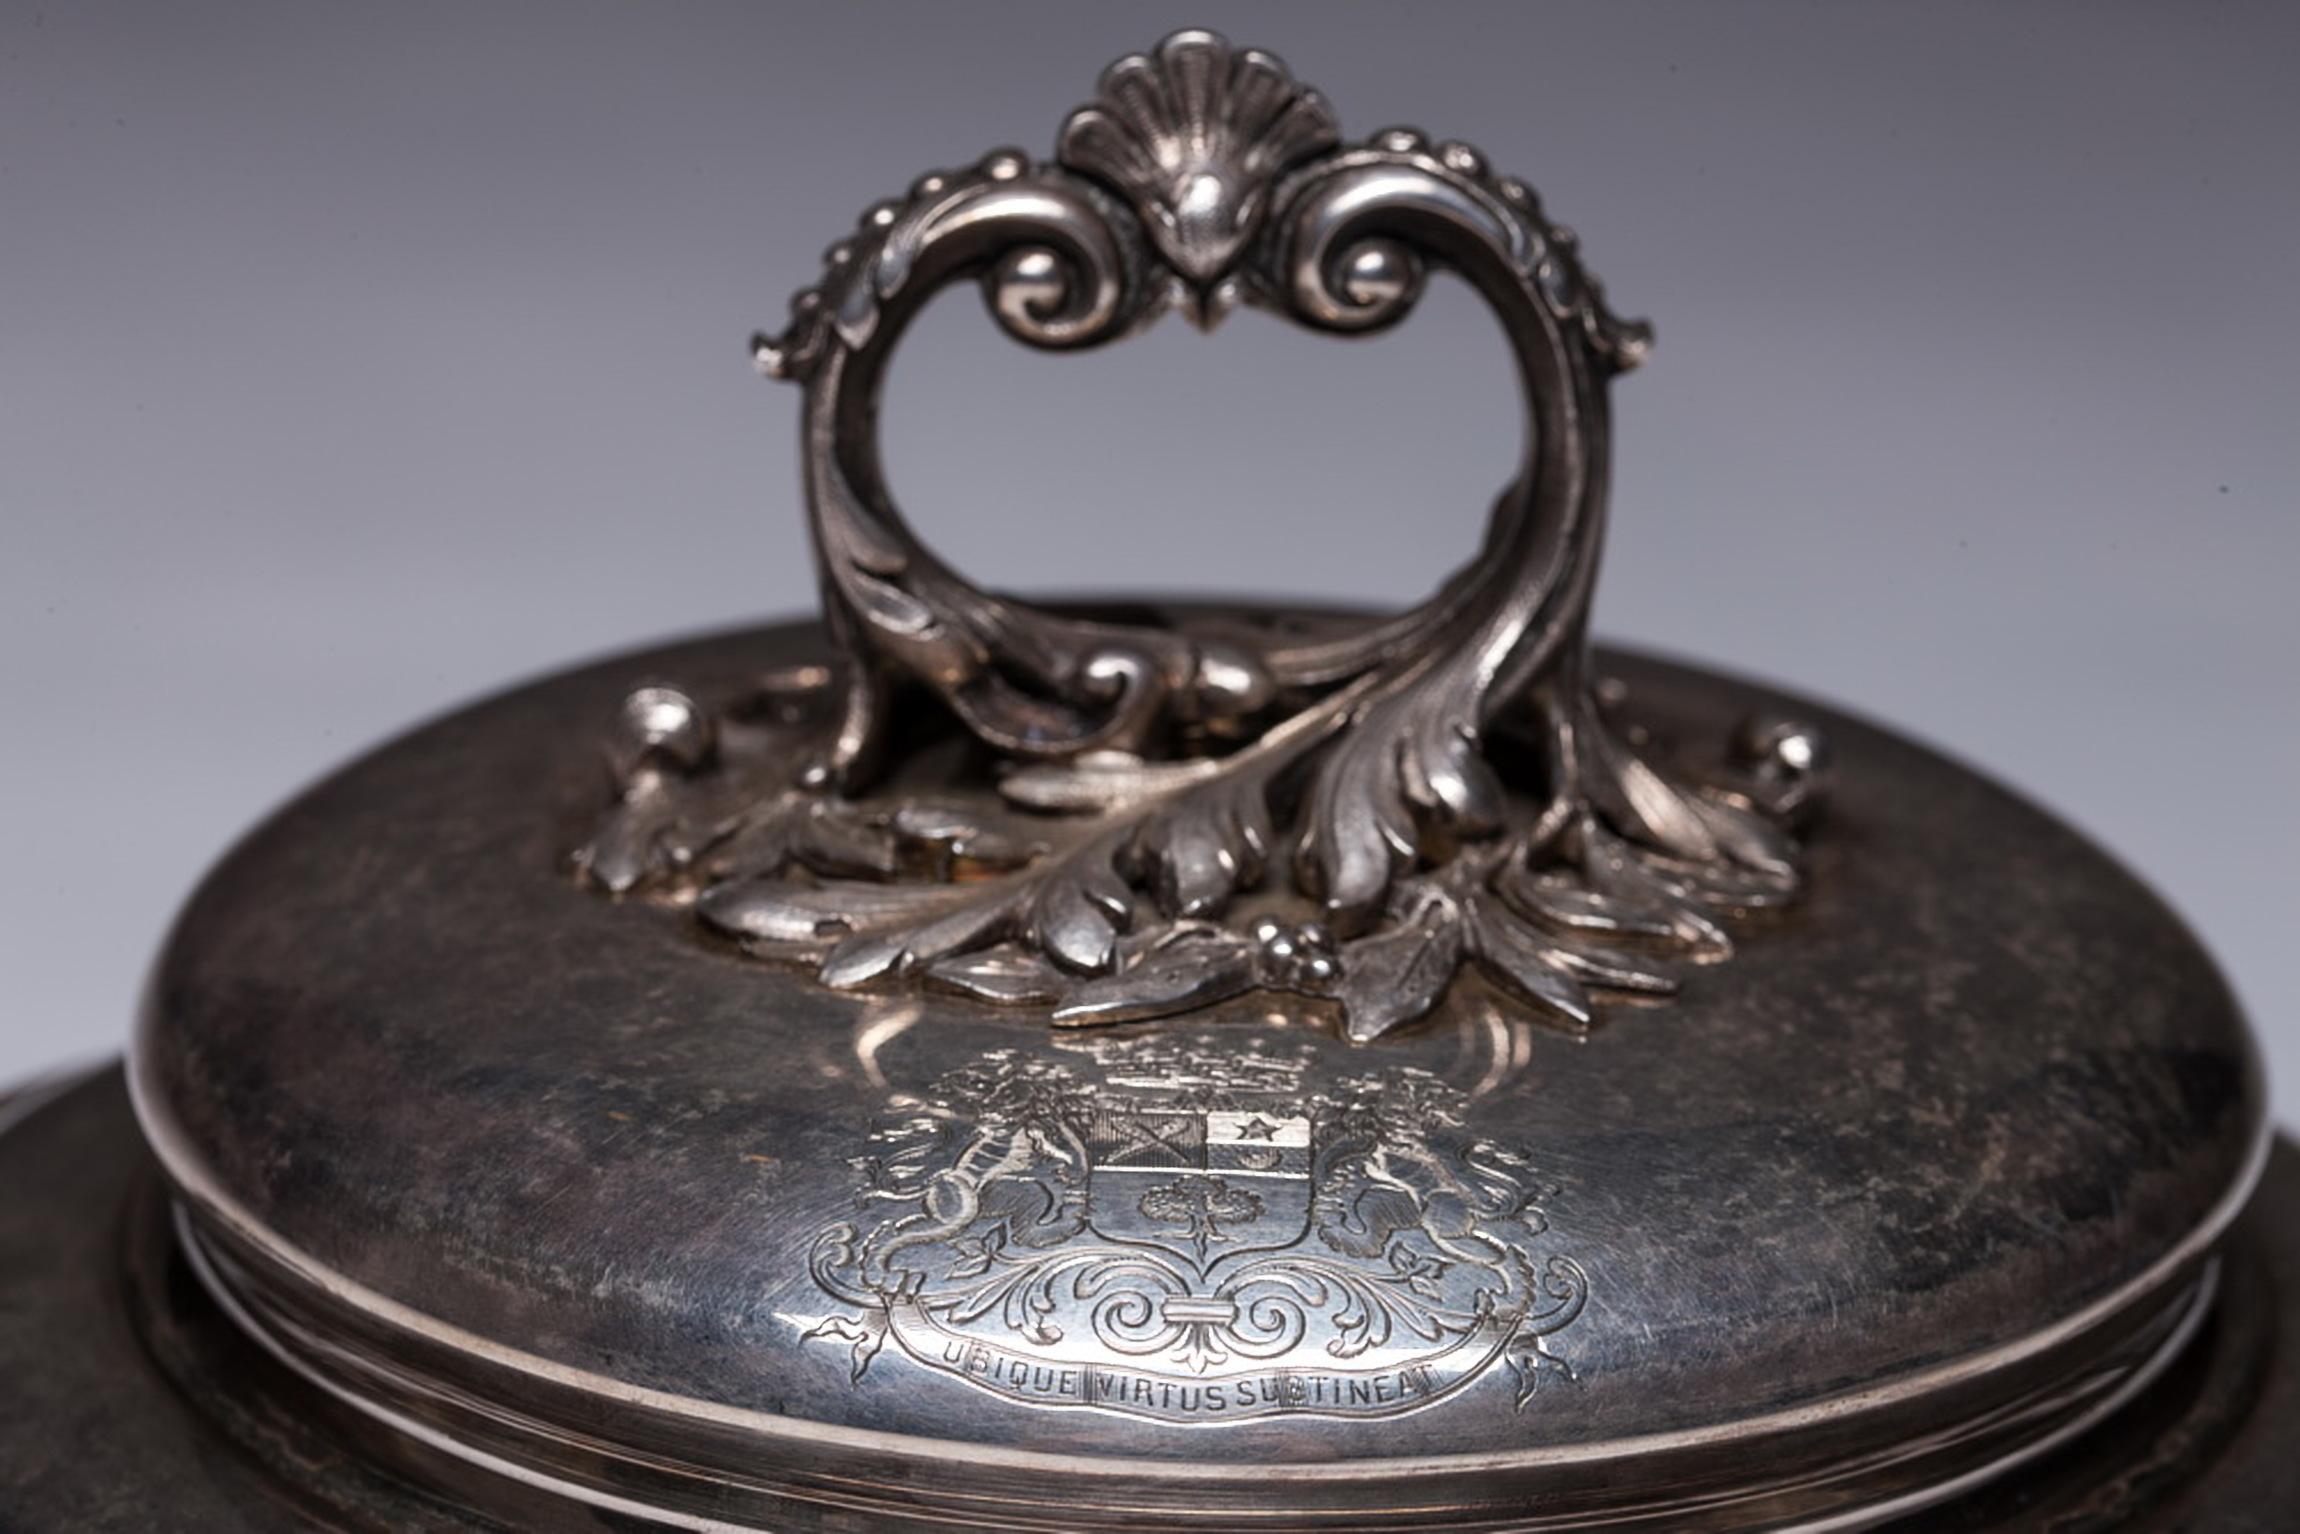 Antique French sterling silver Louis XV style soup or vegetable tureen, raised on four scroll feet and panelled body and lid accented with chased rocaille borders. The domed lid is surmounted by a remarkable large cast and chased finial depicting a